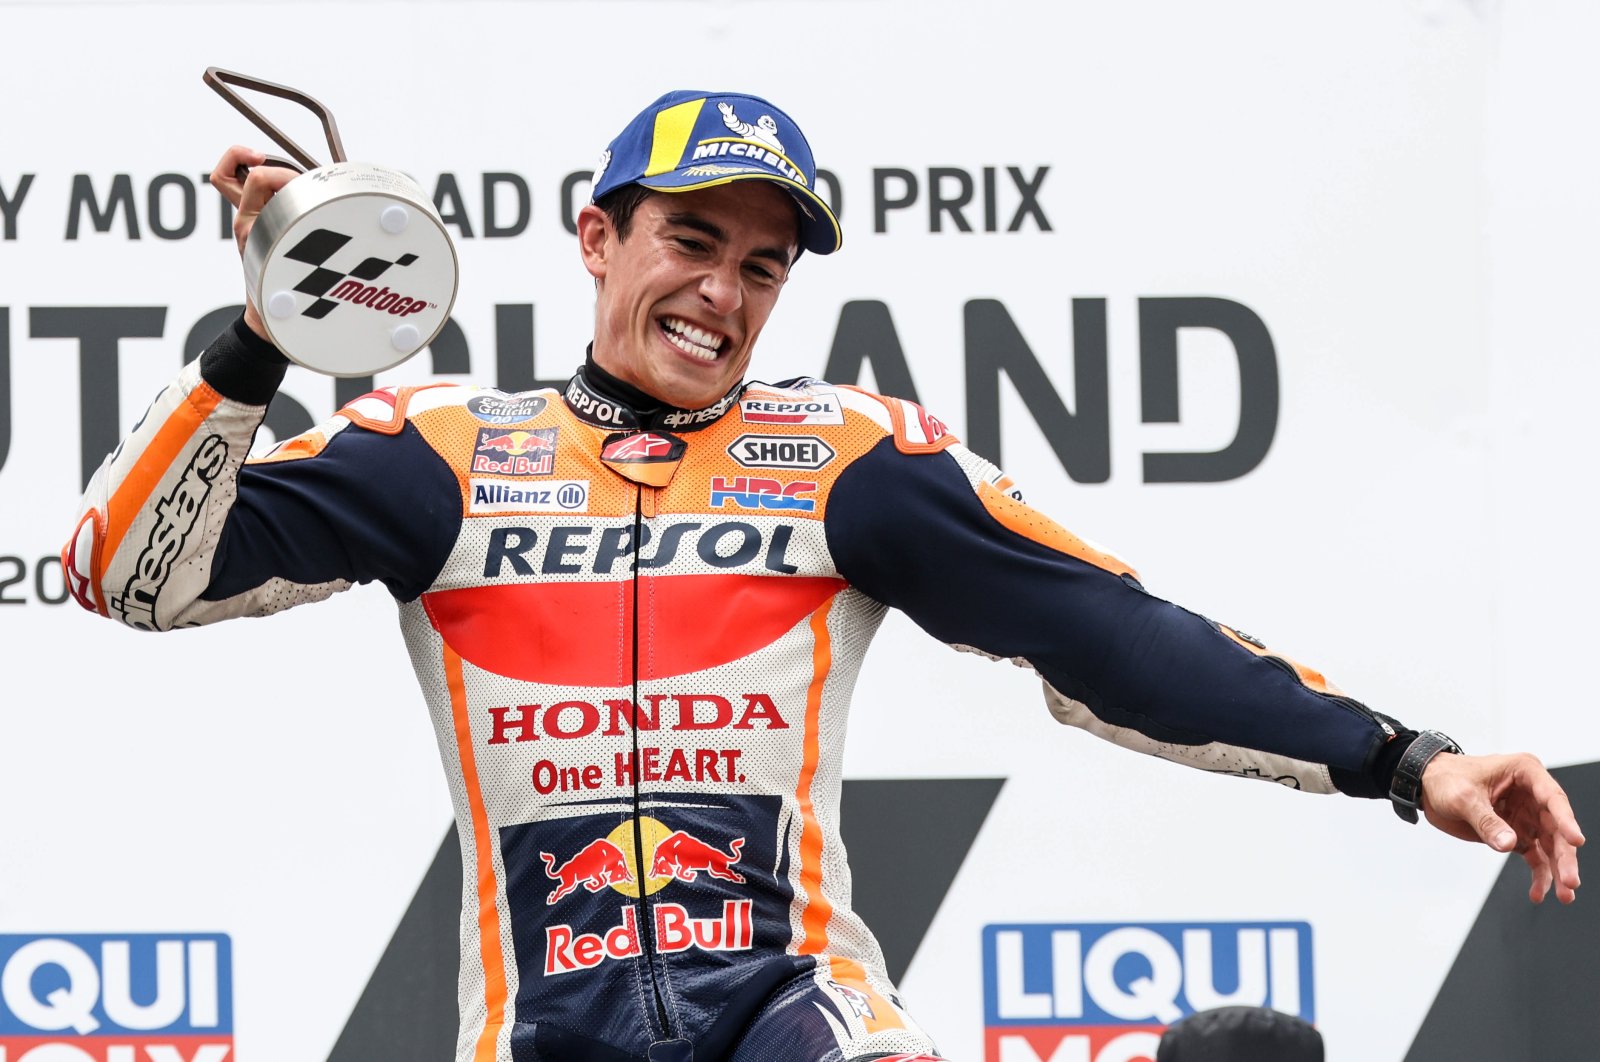 Repsol Honda Team's Spanish MotoGP rider Marc Marquez celebrates winning the Motorcycling Grand Prix of Germany at the Sachsenring racing circuit, Hohenstein-Ernstthal, Germany, June 20, 2021. (EPA Photo)